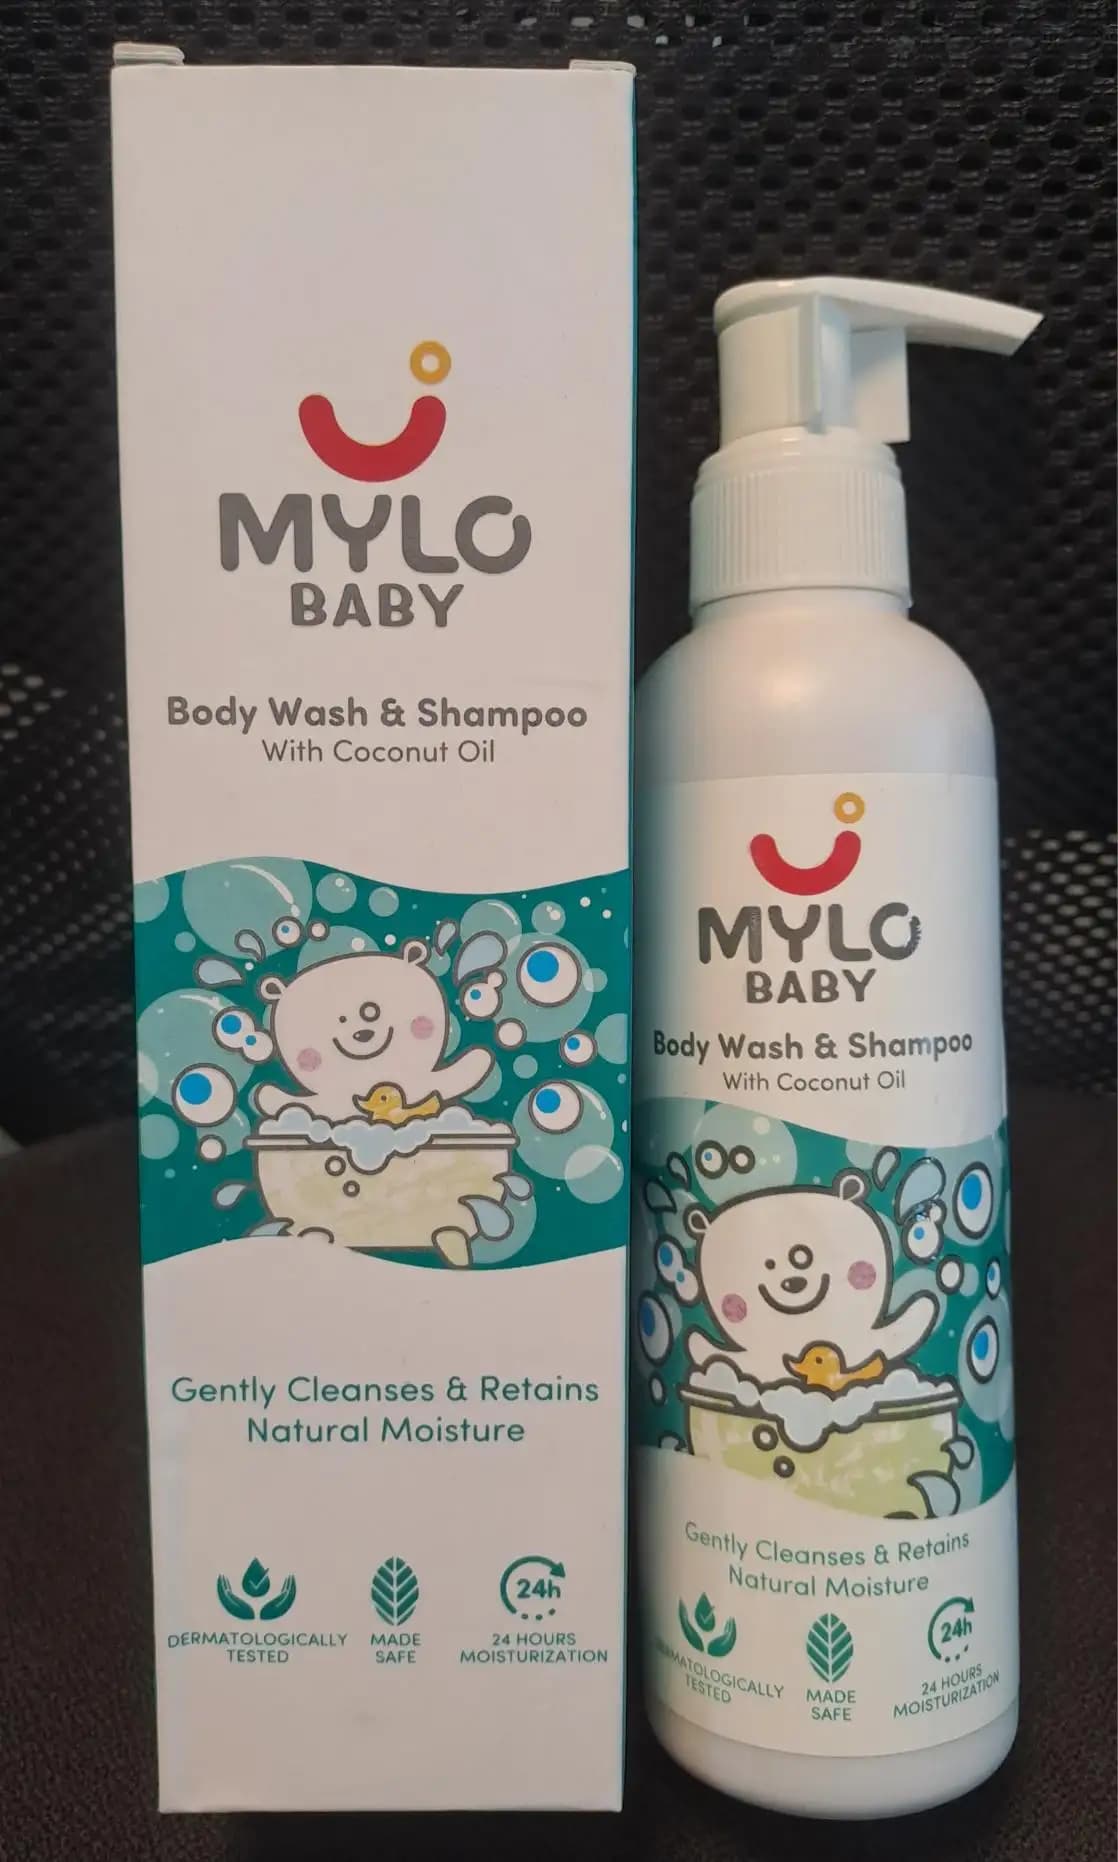 Baby Shampoo and Body Wash | Gentle Cleansing Head-to-Toe | Tear Free Formulation | Retains Natural Moisture | Dermatologically Tested | Made Safe Certified- 200 ml